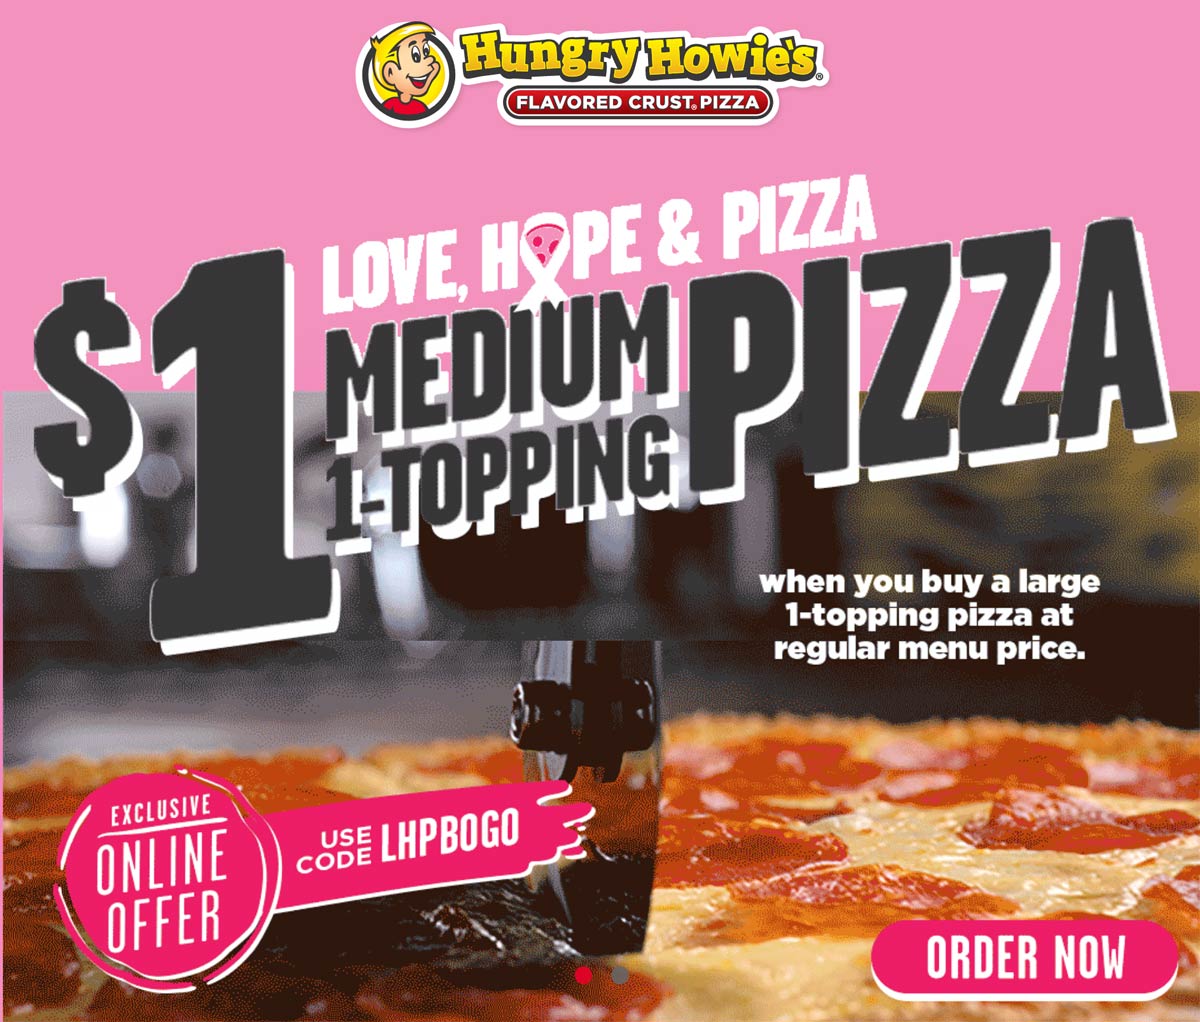 Hungry Howies restaurants Coupon  $1 medium pizza with your large at Hungry Howies via promo code LHPBOGO #hungryhowies 